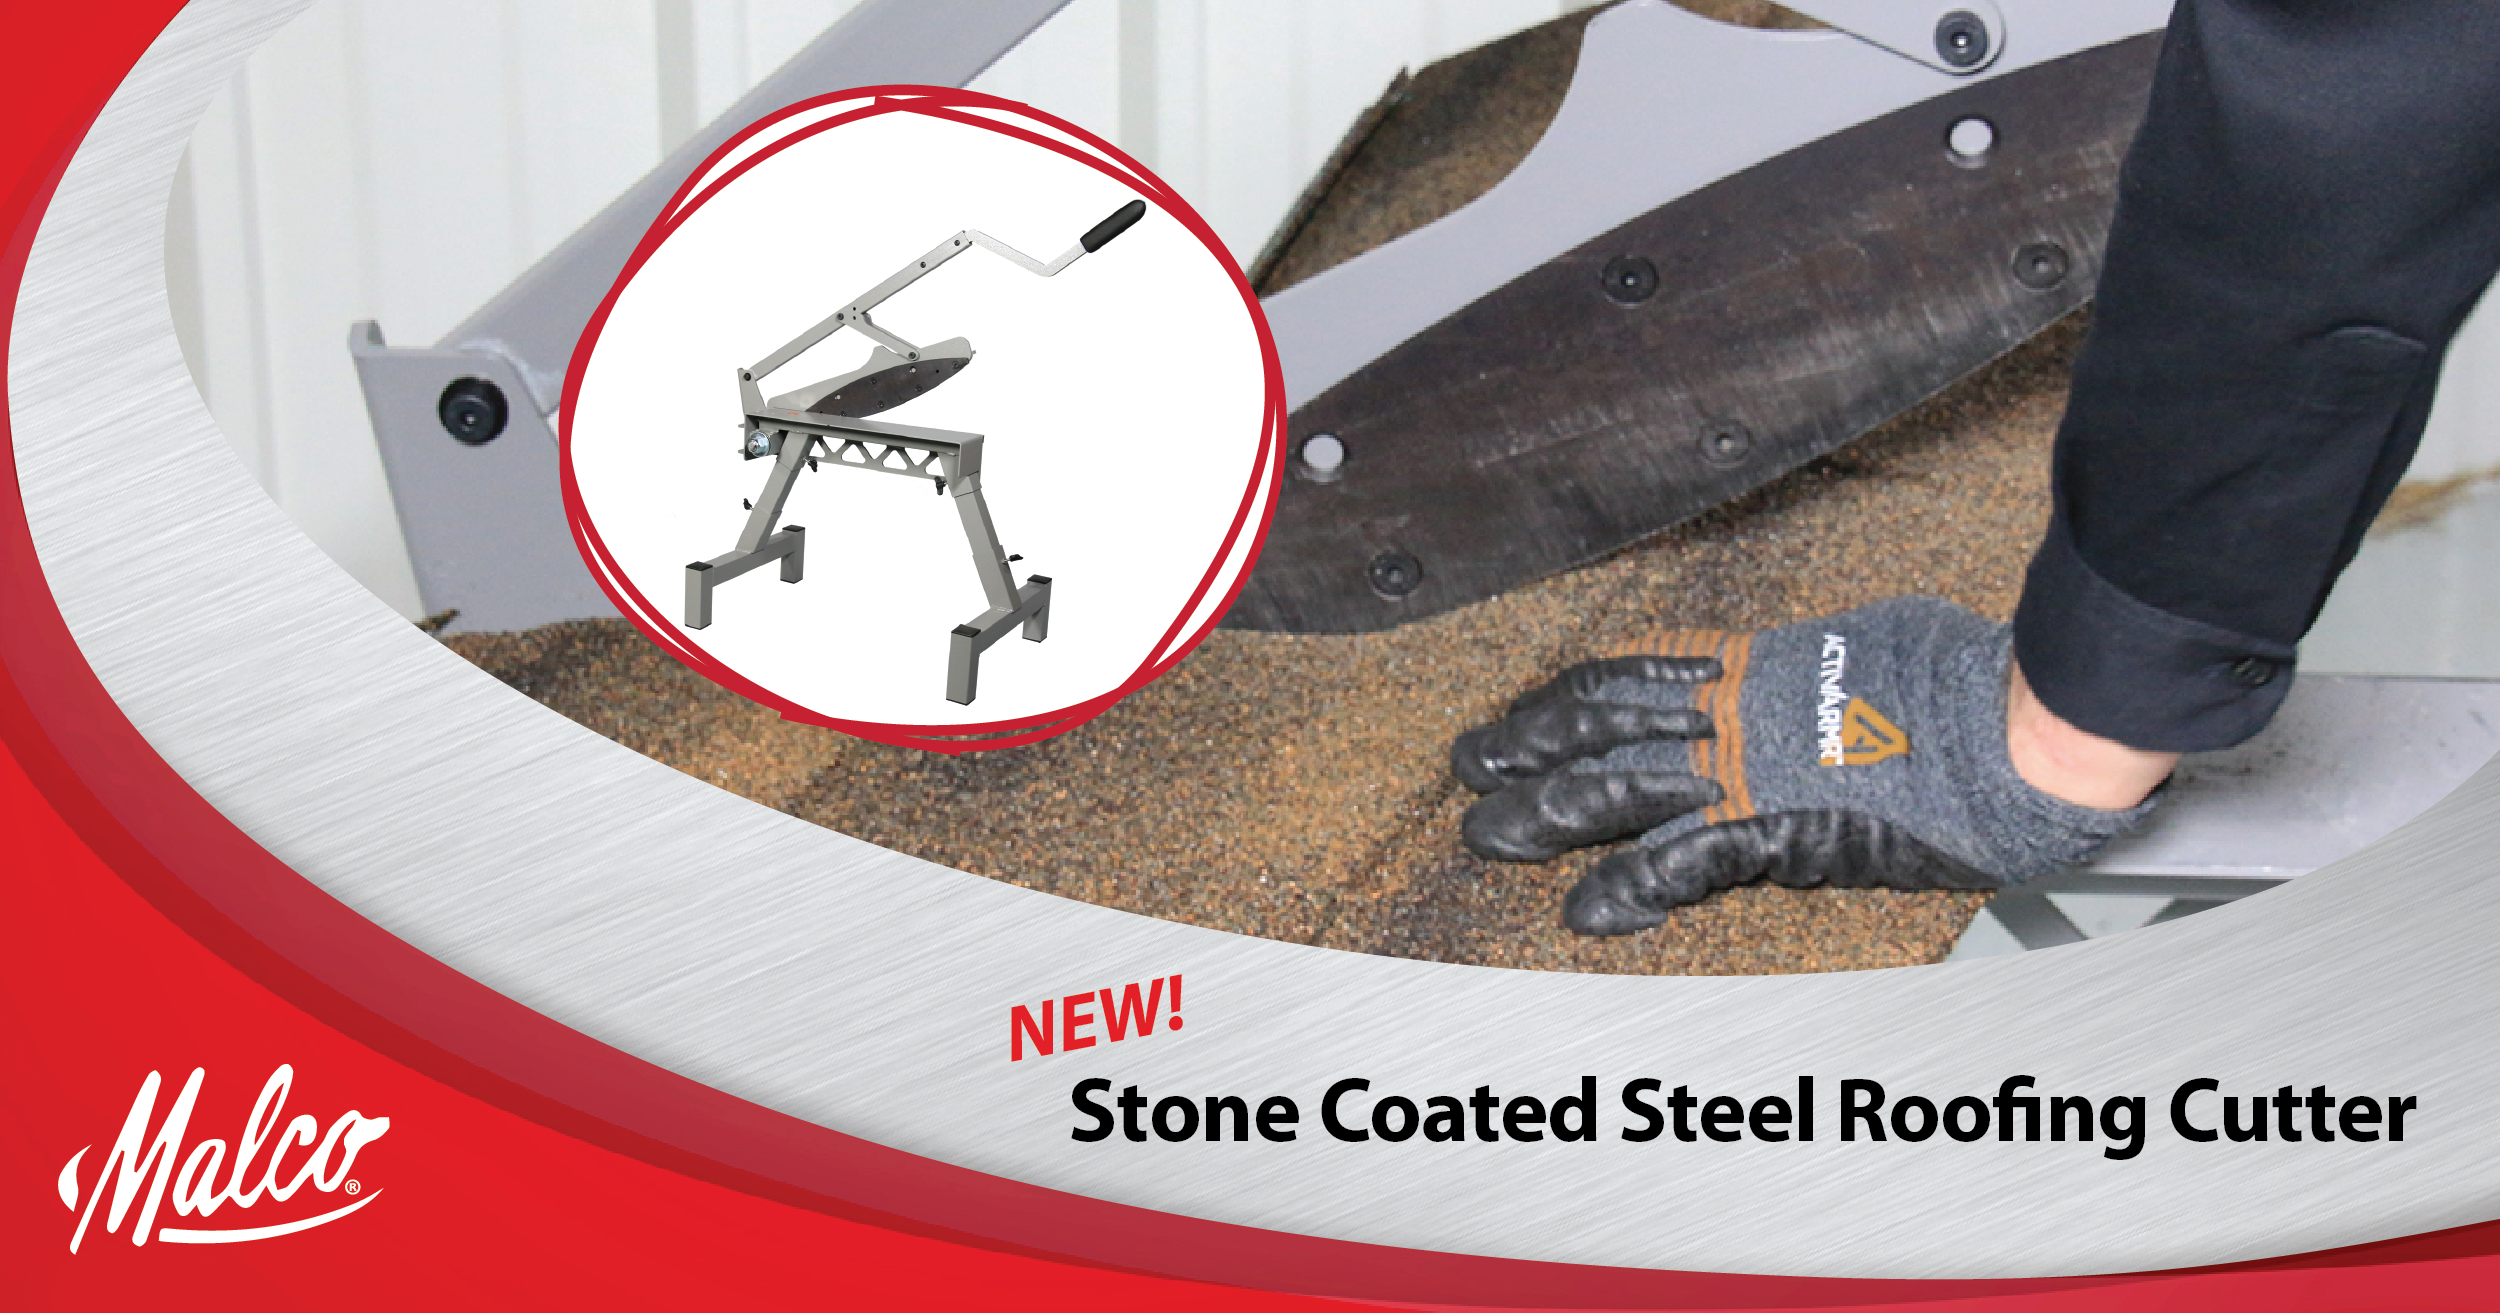 Stone Coated Steel Roofing Cutter